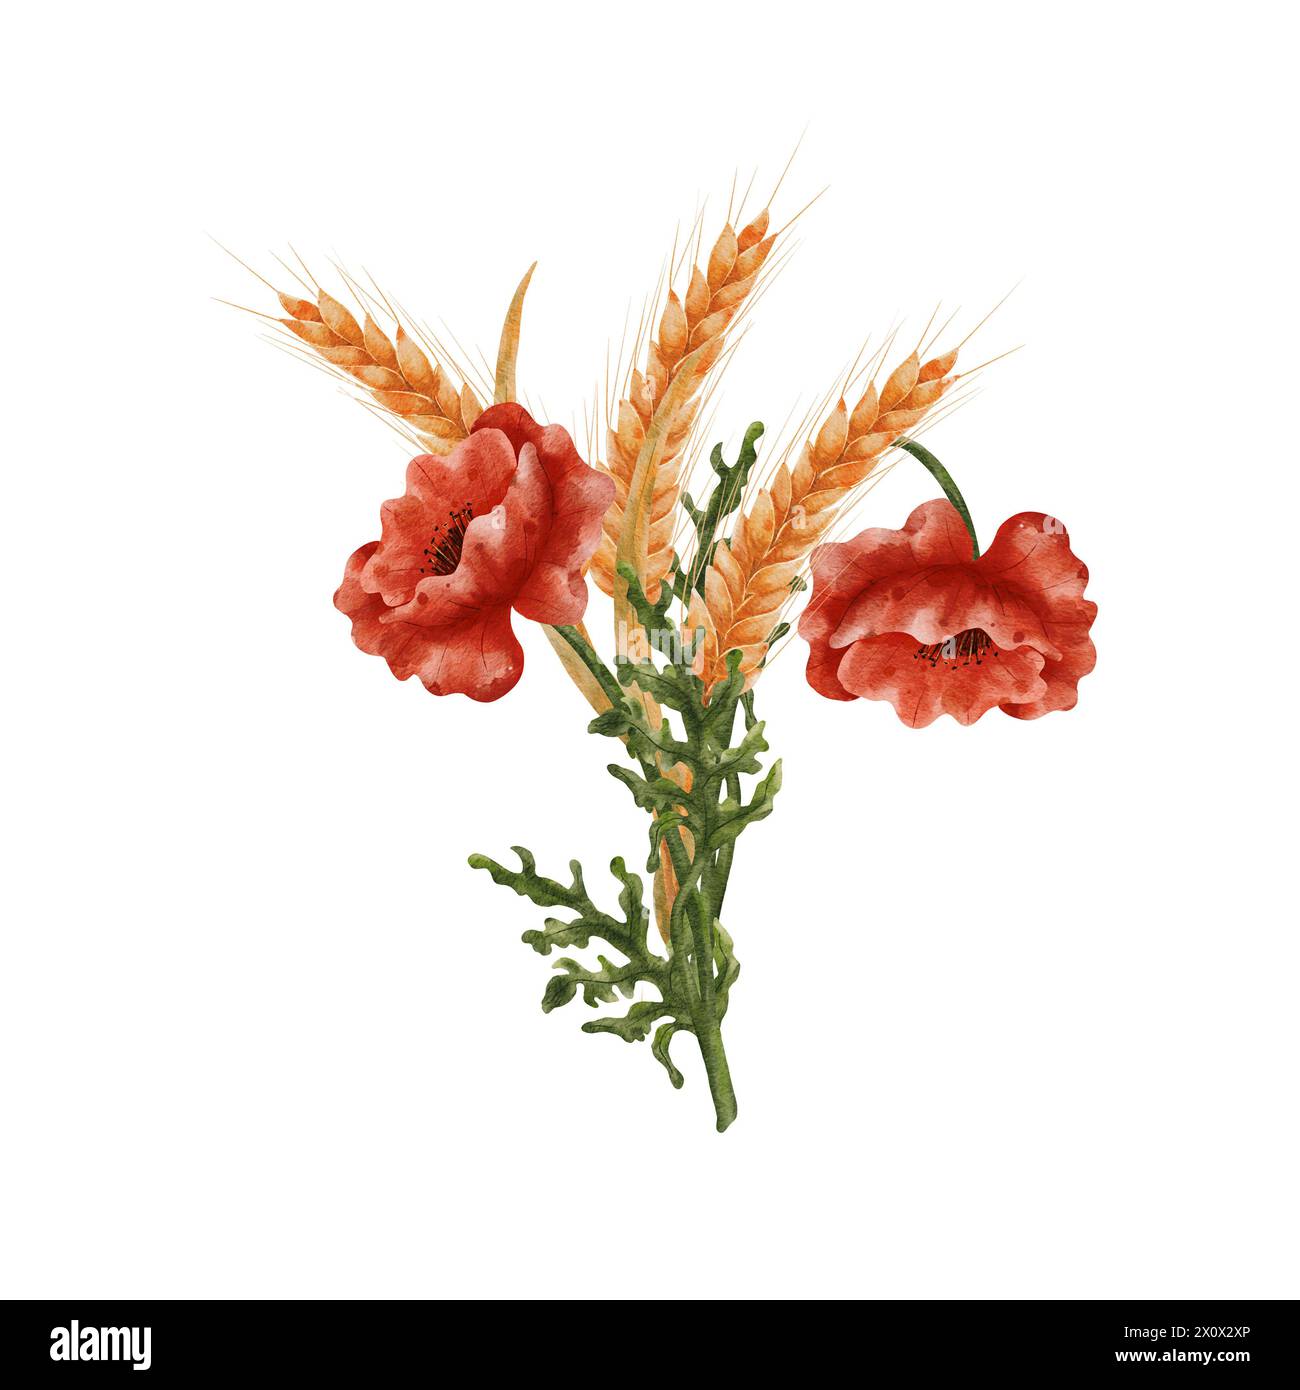 Ears of ripe wheat and red poppies. A bouquet, a composition of spikelets of grain and field poppies. Wheat isolated on white background. Design for Stock Photo